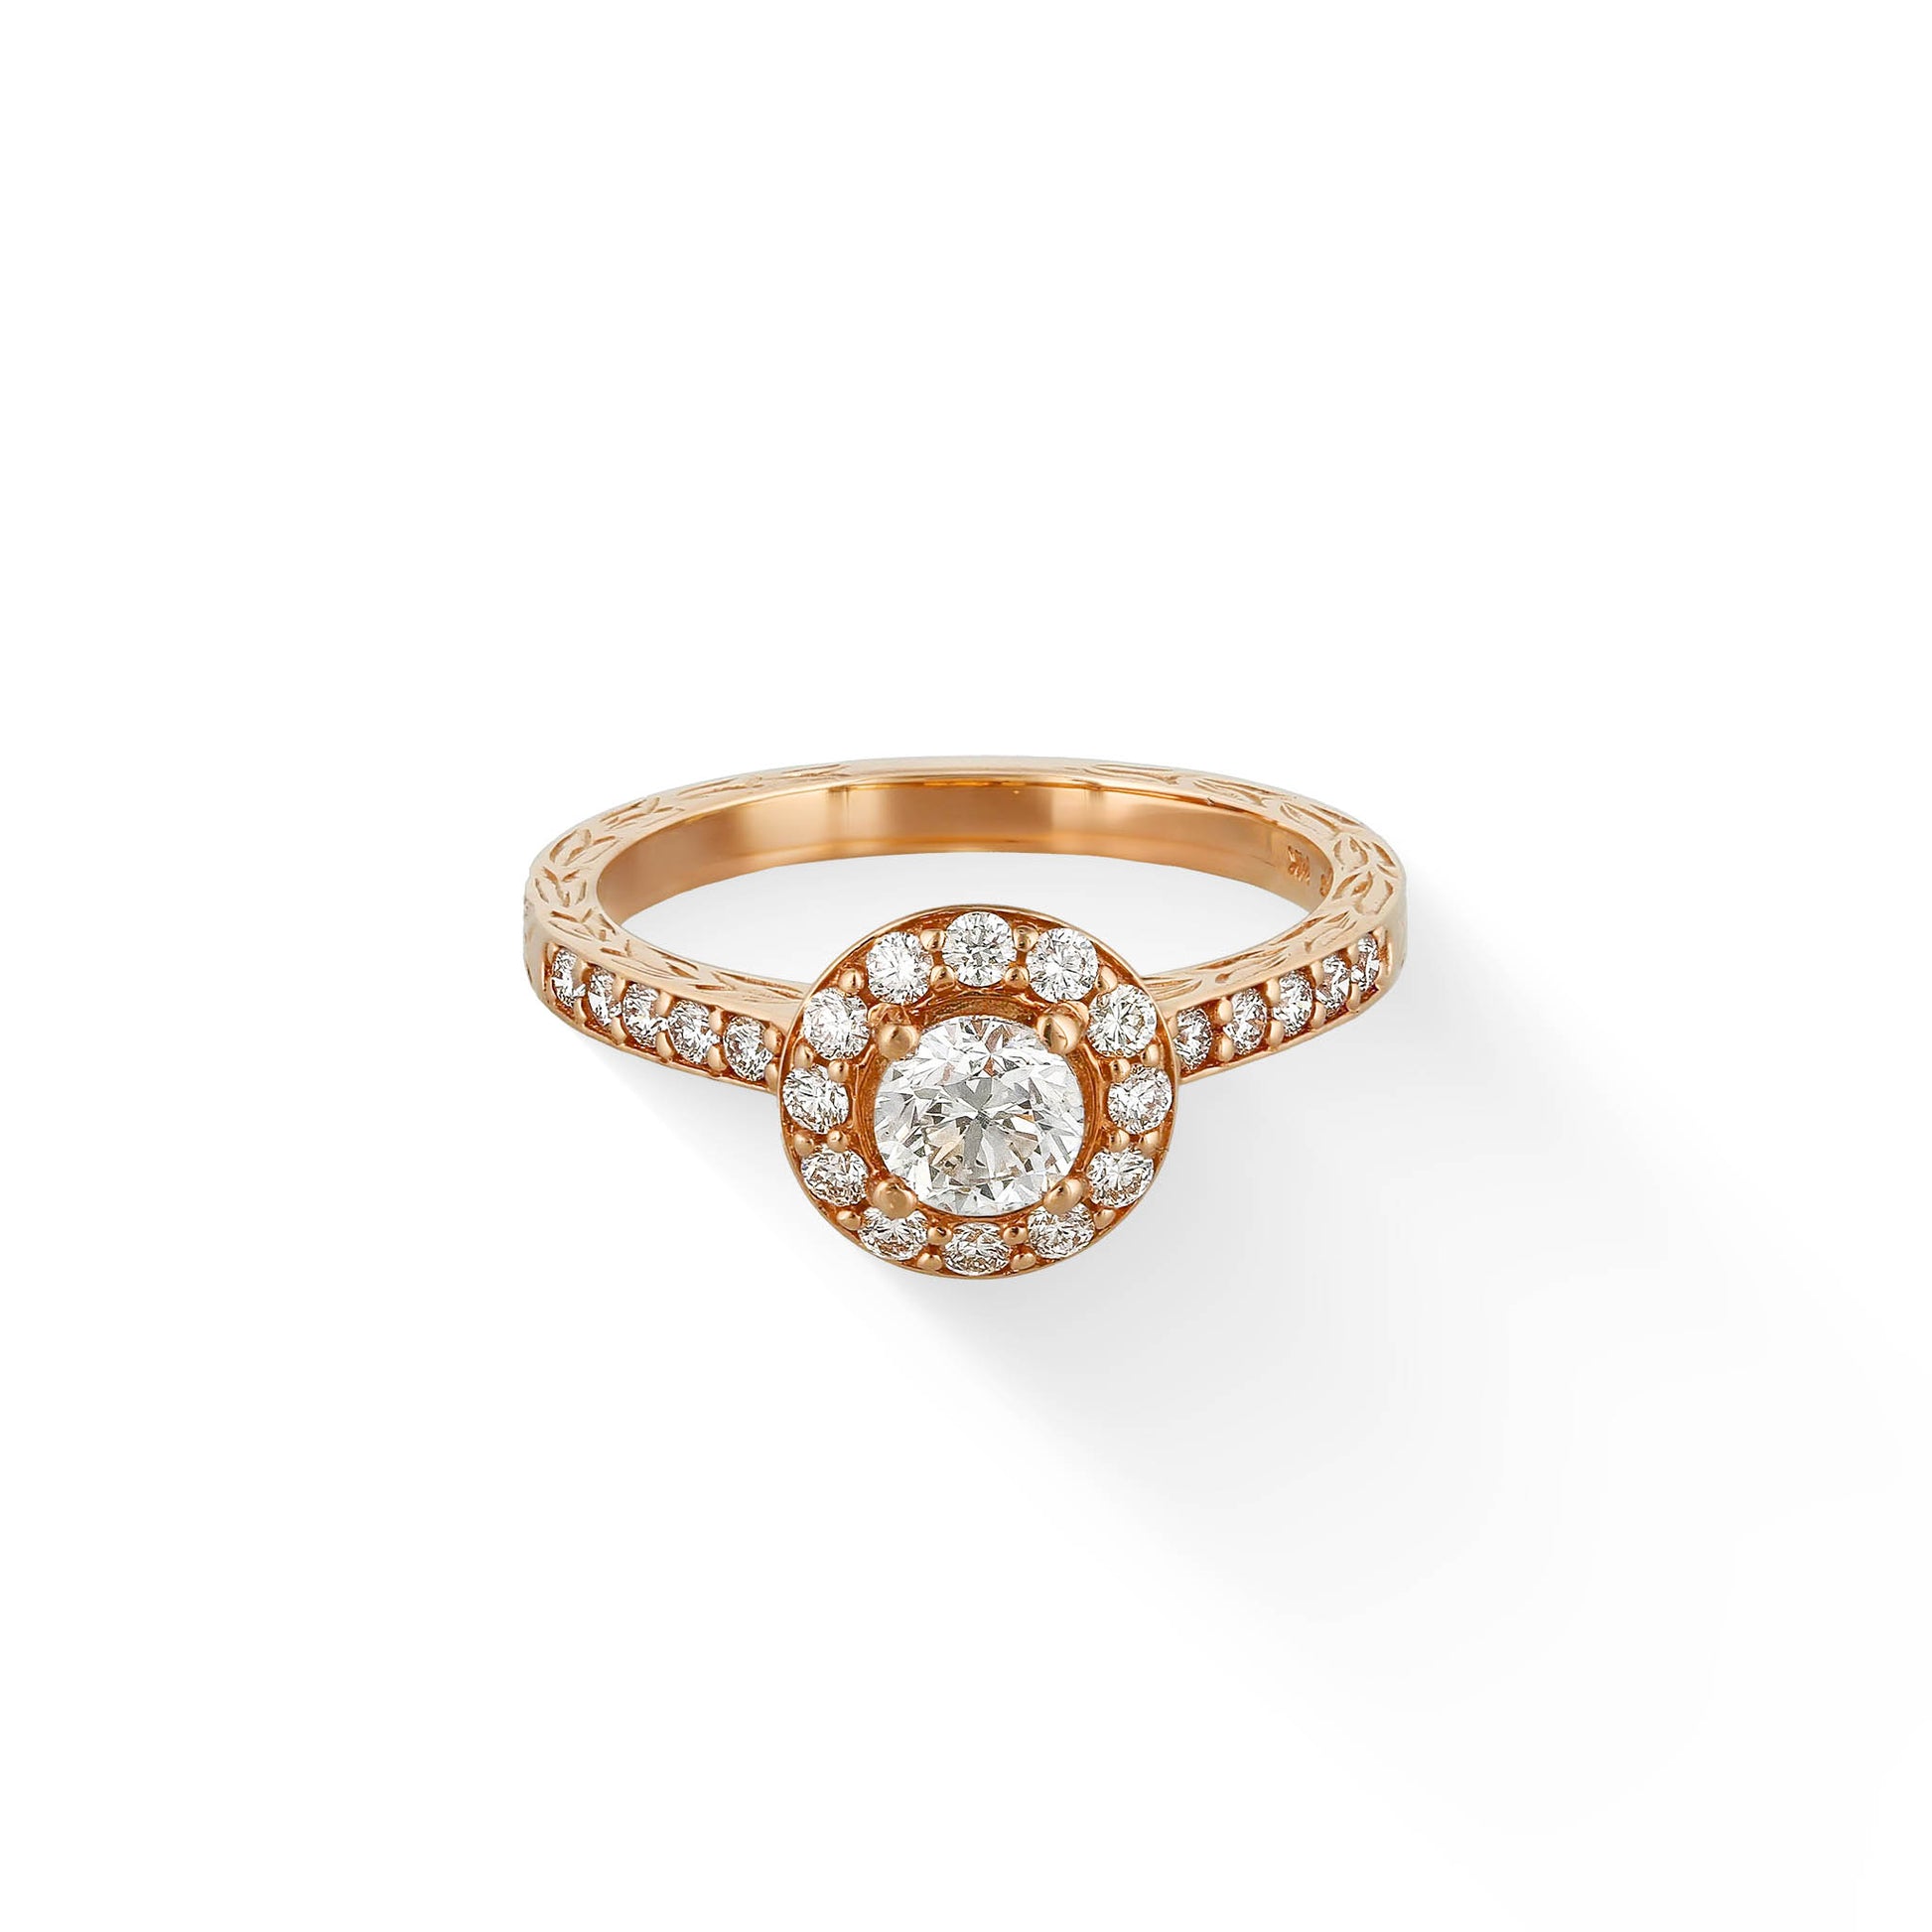 43187 - 14K Rose Gold - Maile Scroll Solitaire Halo Ring